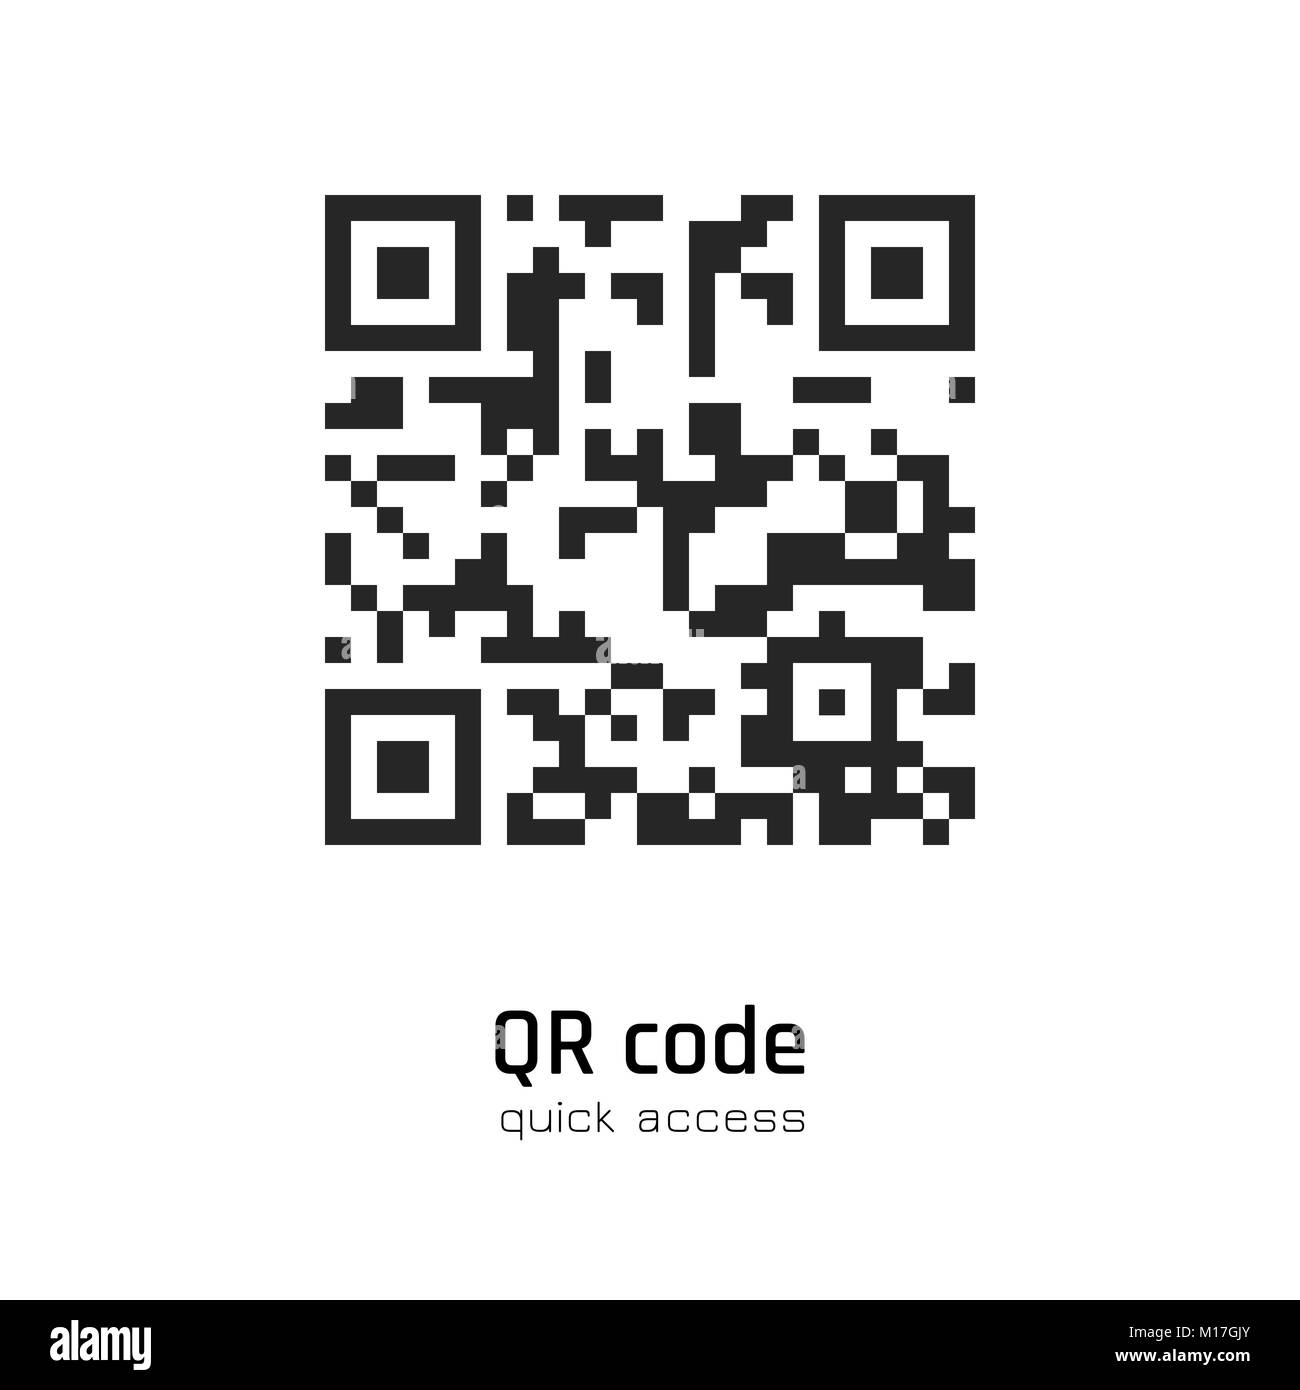 QR code for smartphone scanning. Vector illustration isolated on white background. Stock Vector